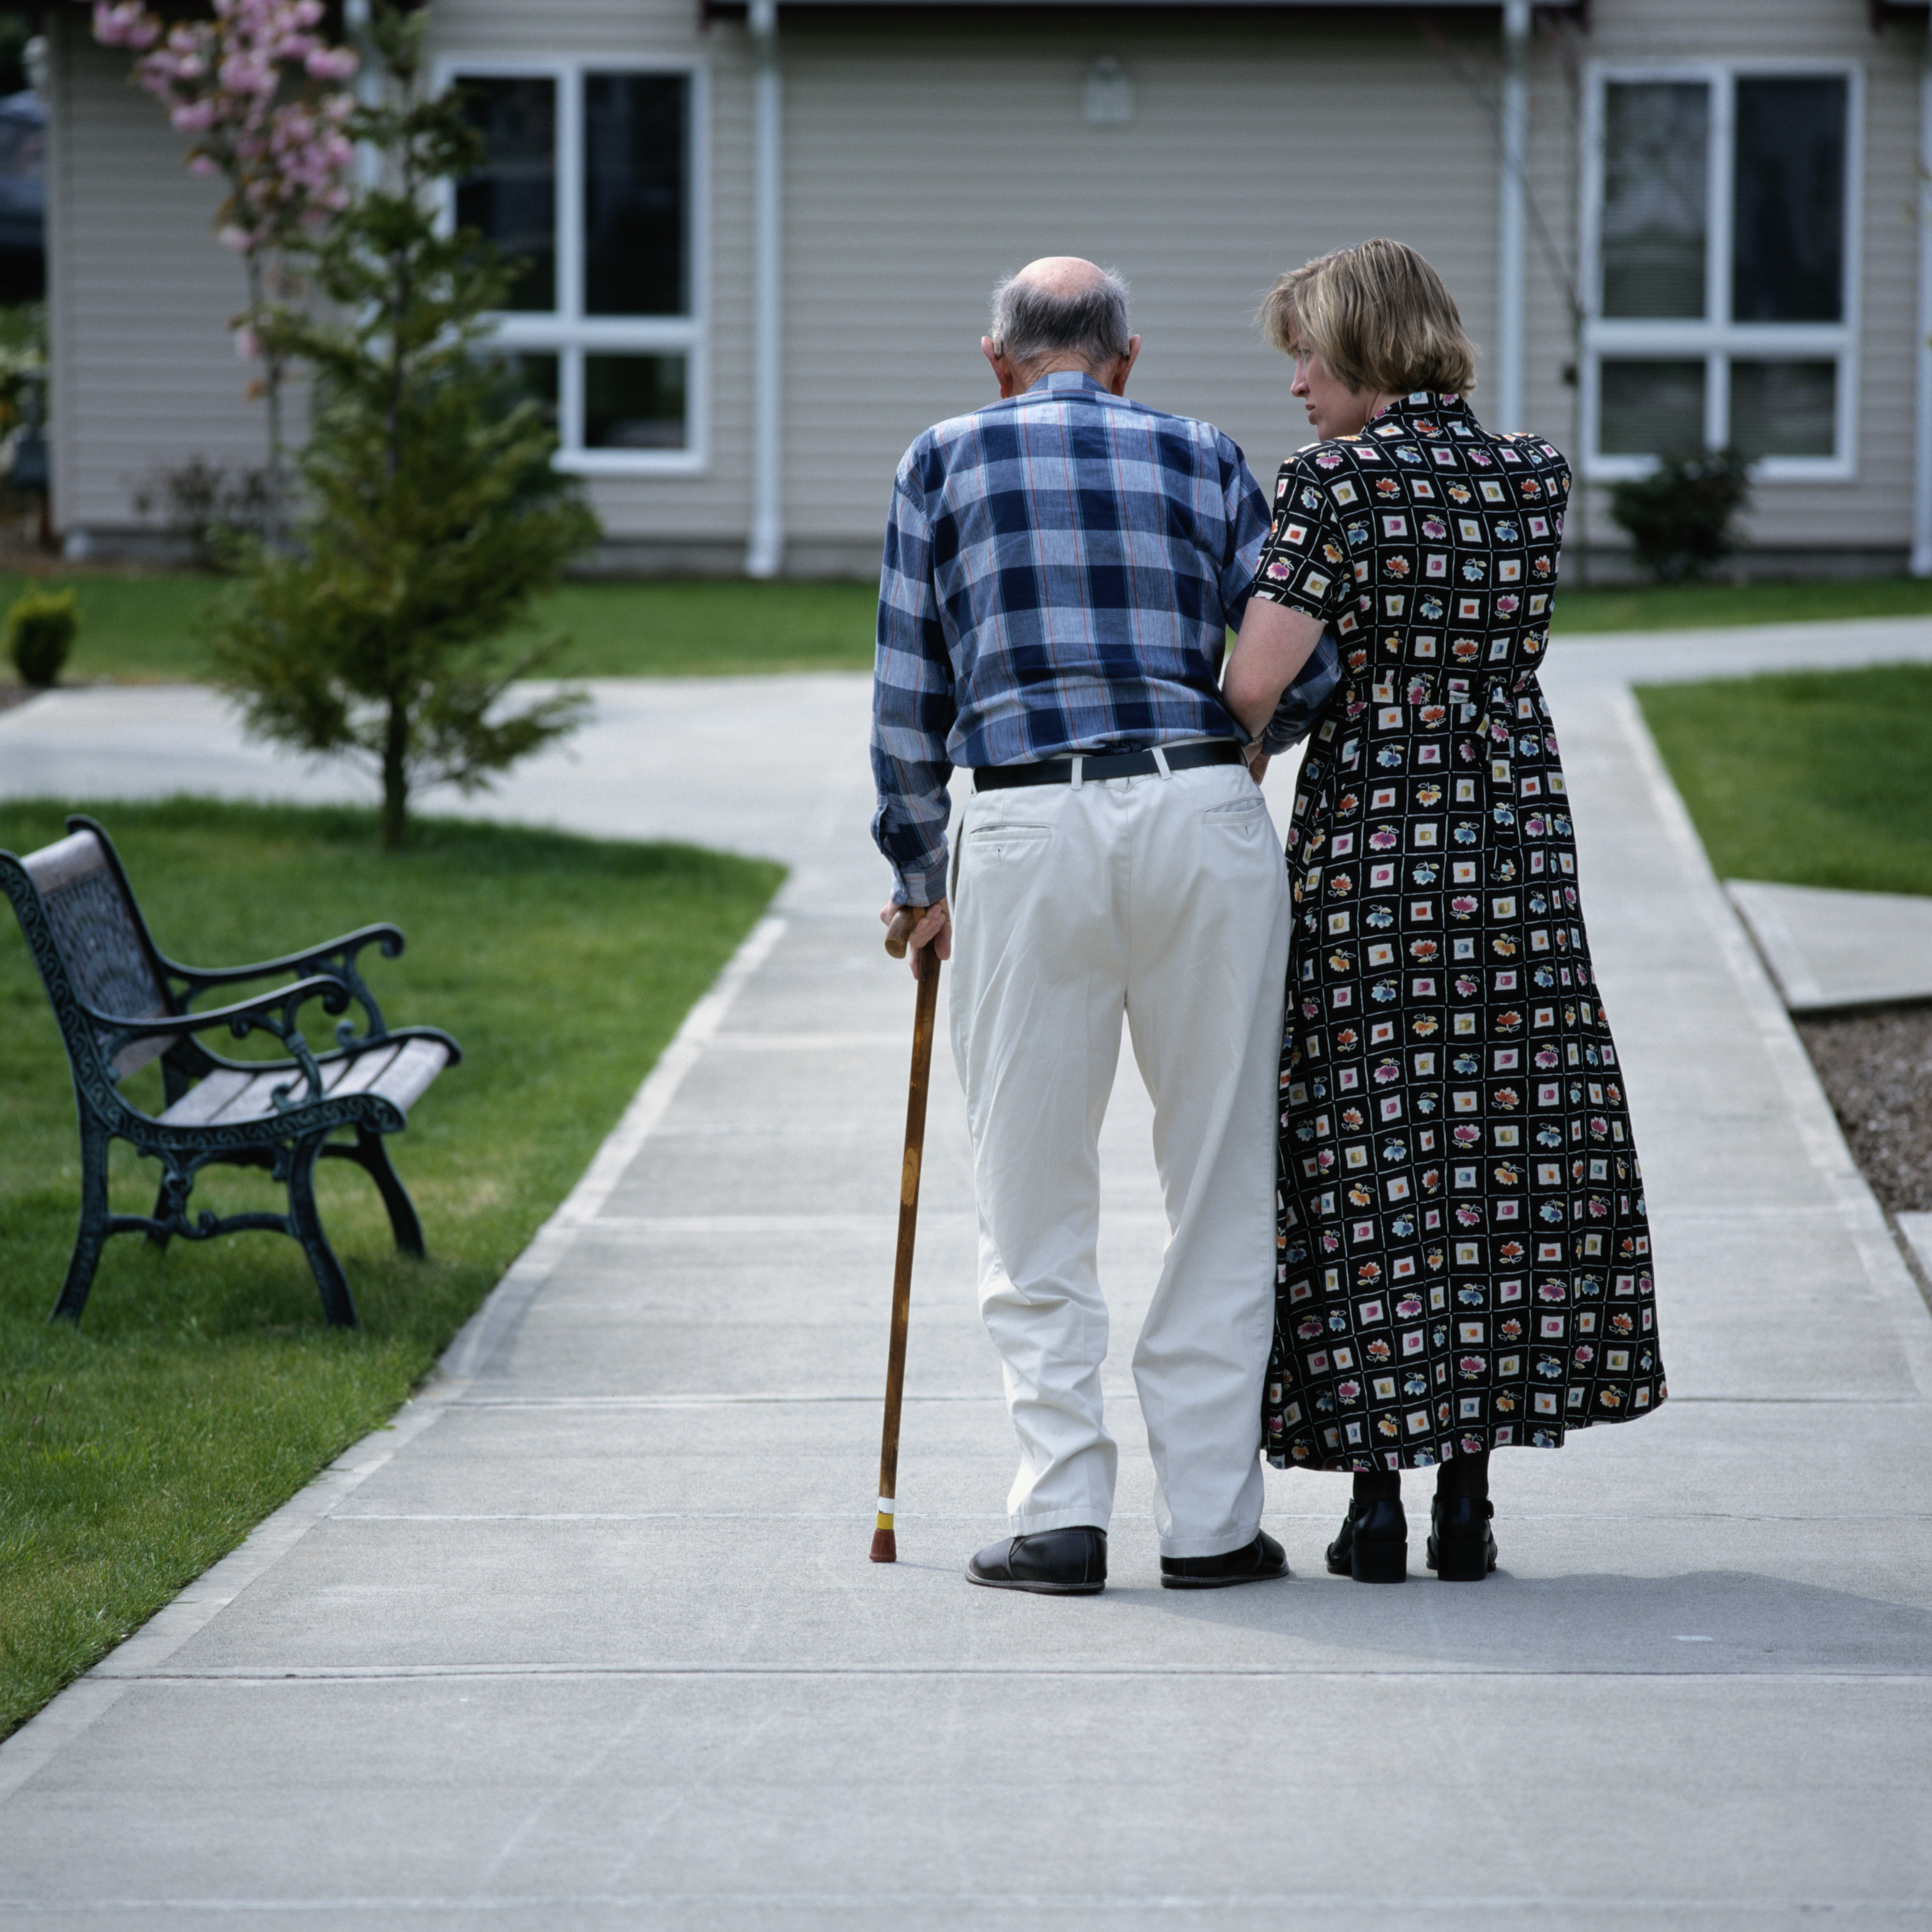 Elderly patient walking with cane and caregiver.